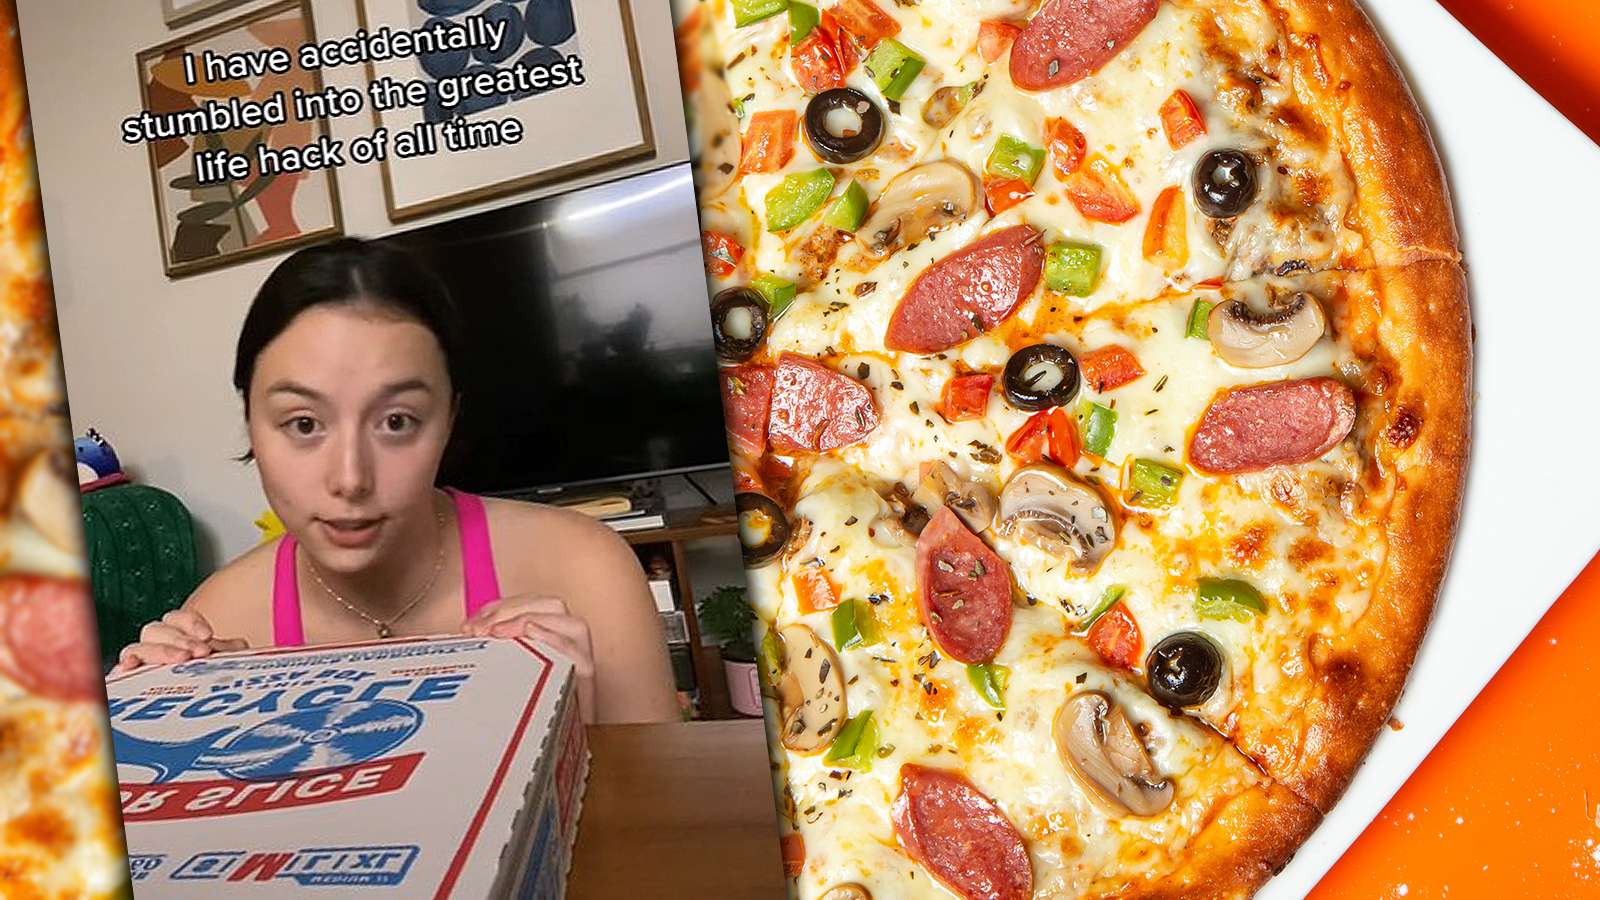 tiktoker goes viral for genius life hack to get free dominos pizzas